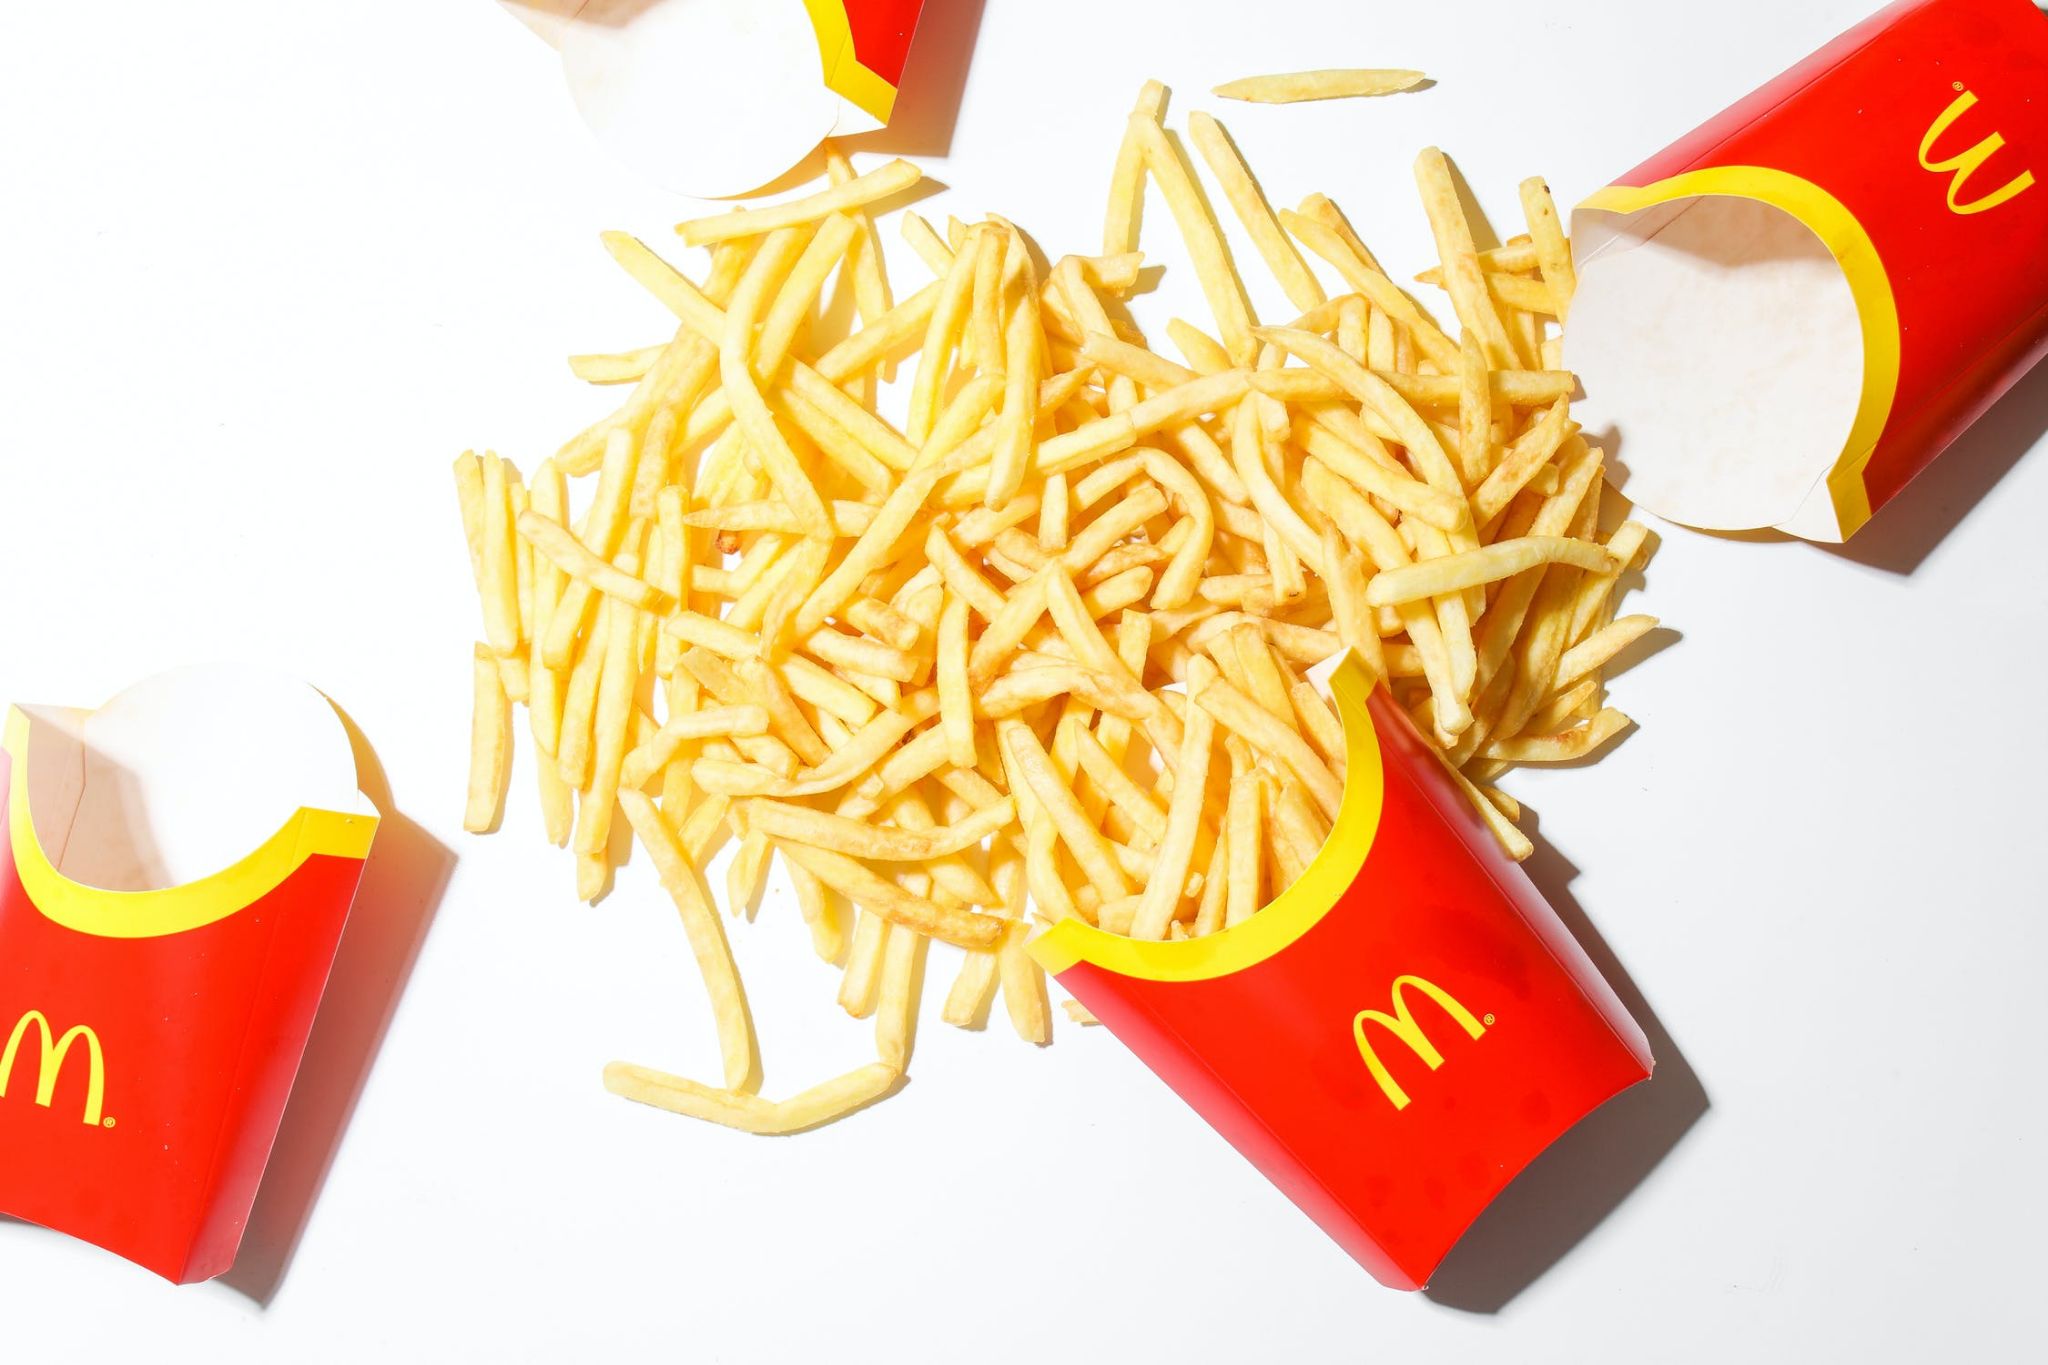 image of McDonald's fries showing their  red and yellow branding